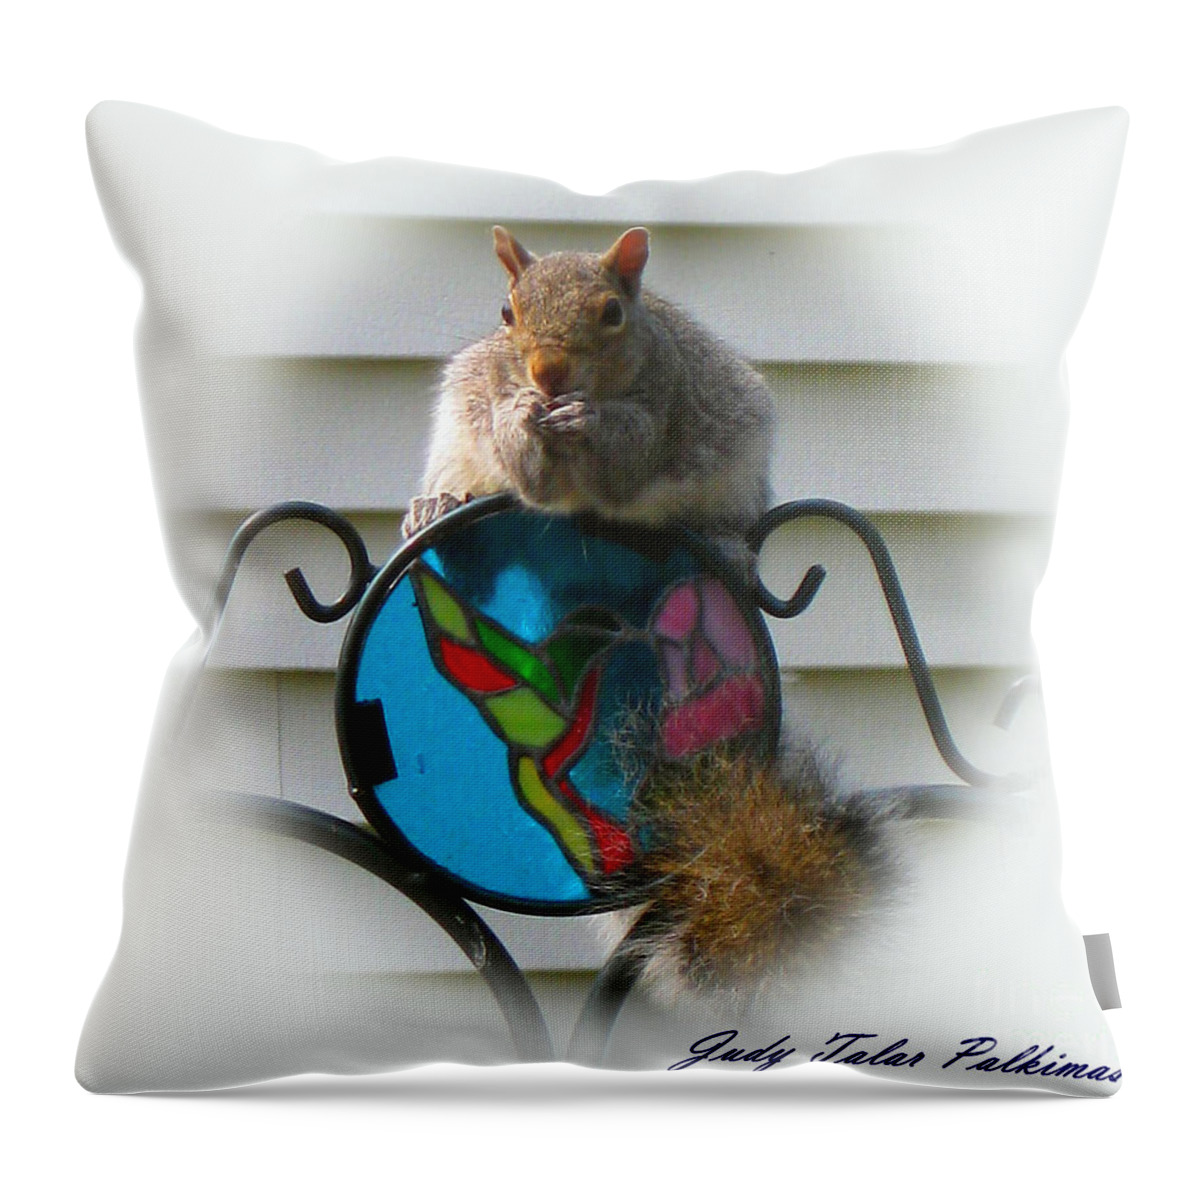 Squirrel Throw Pillow featuring the photograph Having A Snack by Judy Palkimas